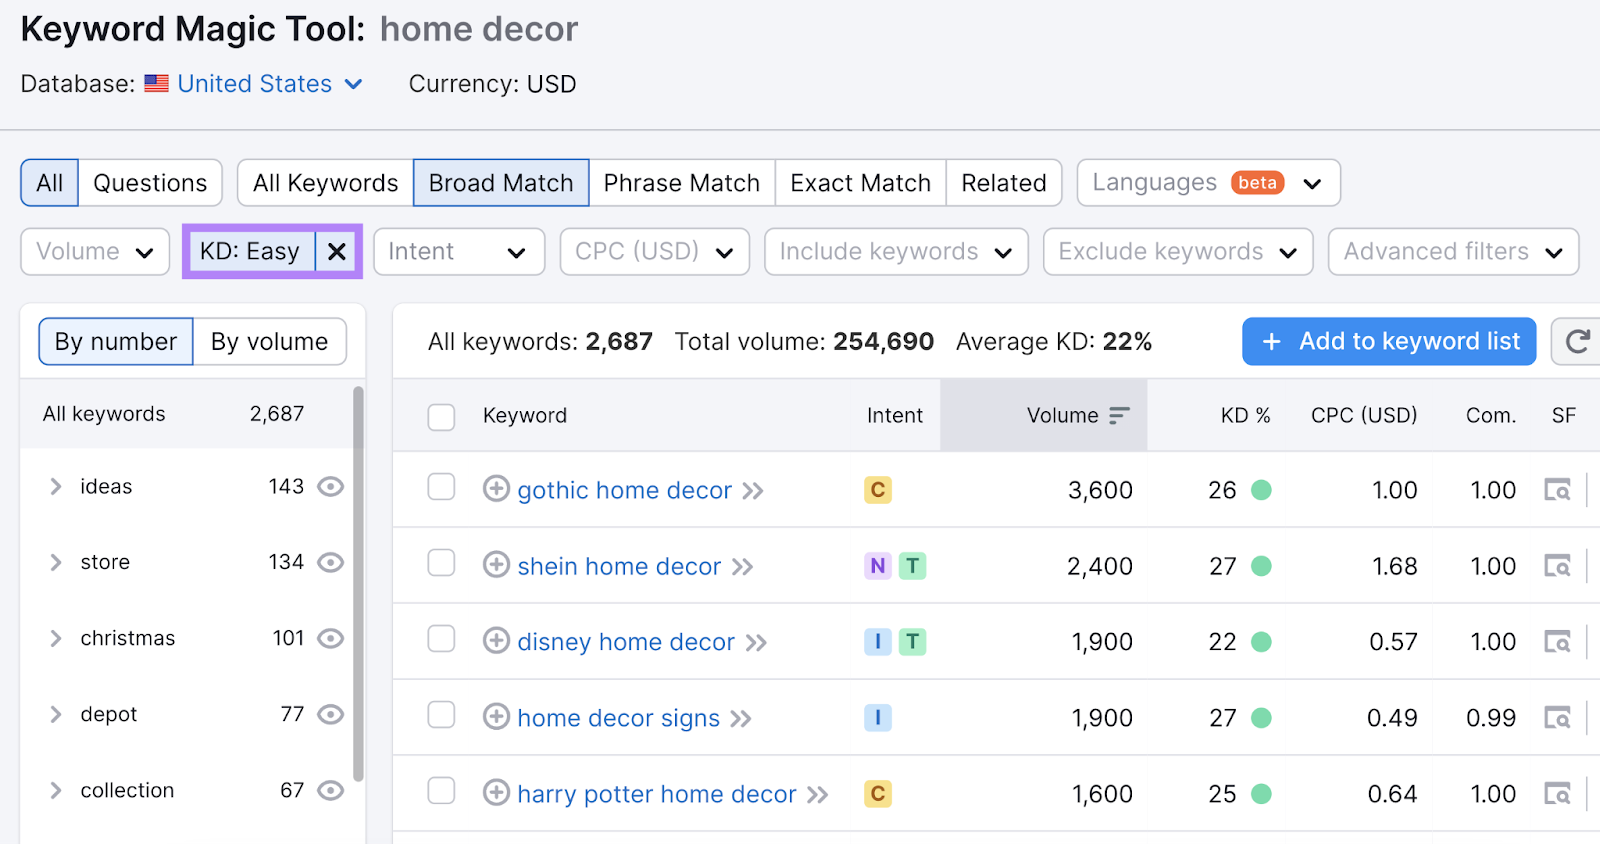 Keyword Magic Tool results for "home decor" filtered by "easy" keyword difficulty